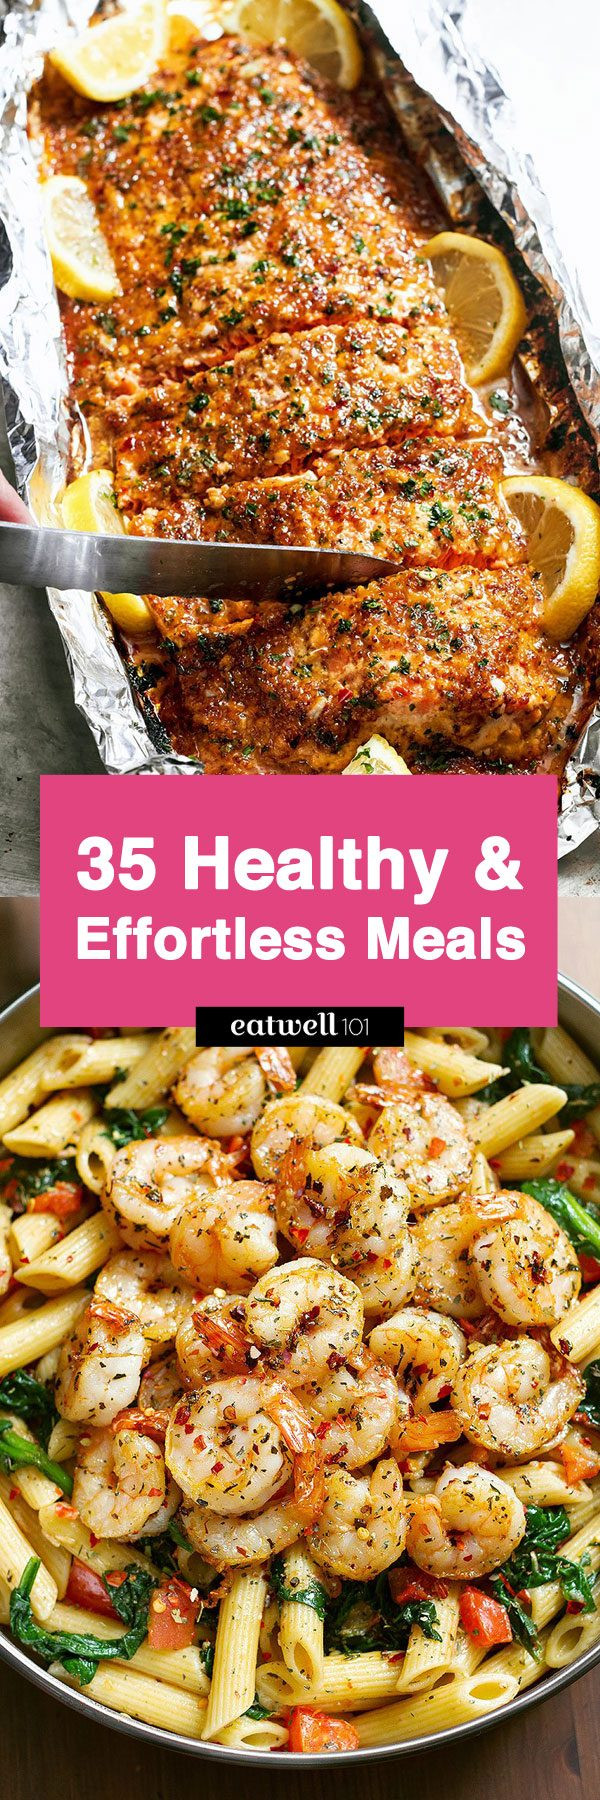 Easy And Healthy Dinner Recipes
 43 Low Effort and Healthy Dinner Recipes — Eatwell101